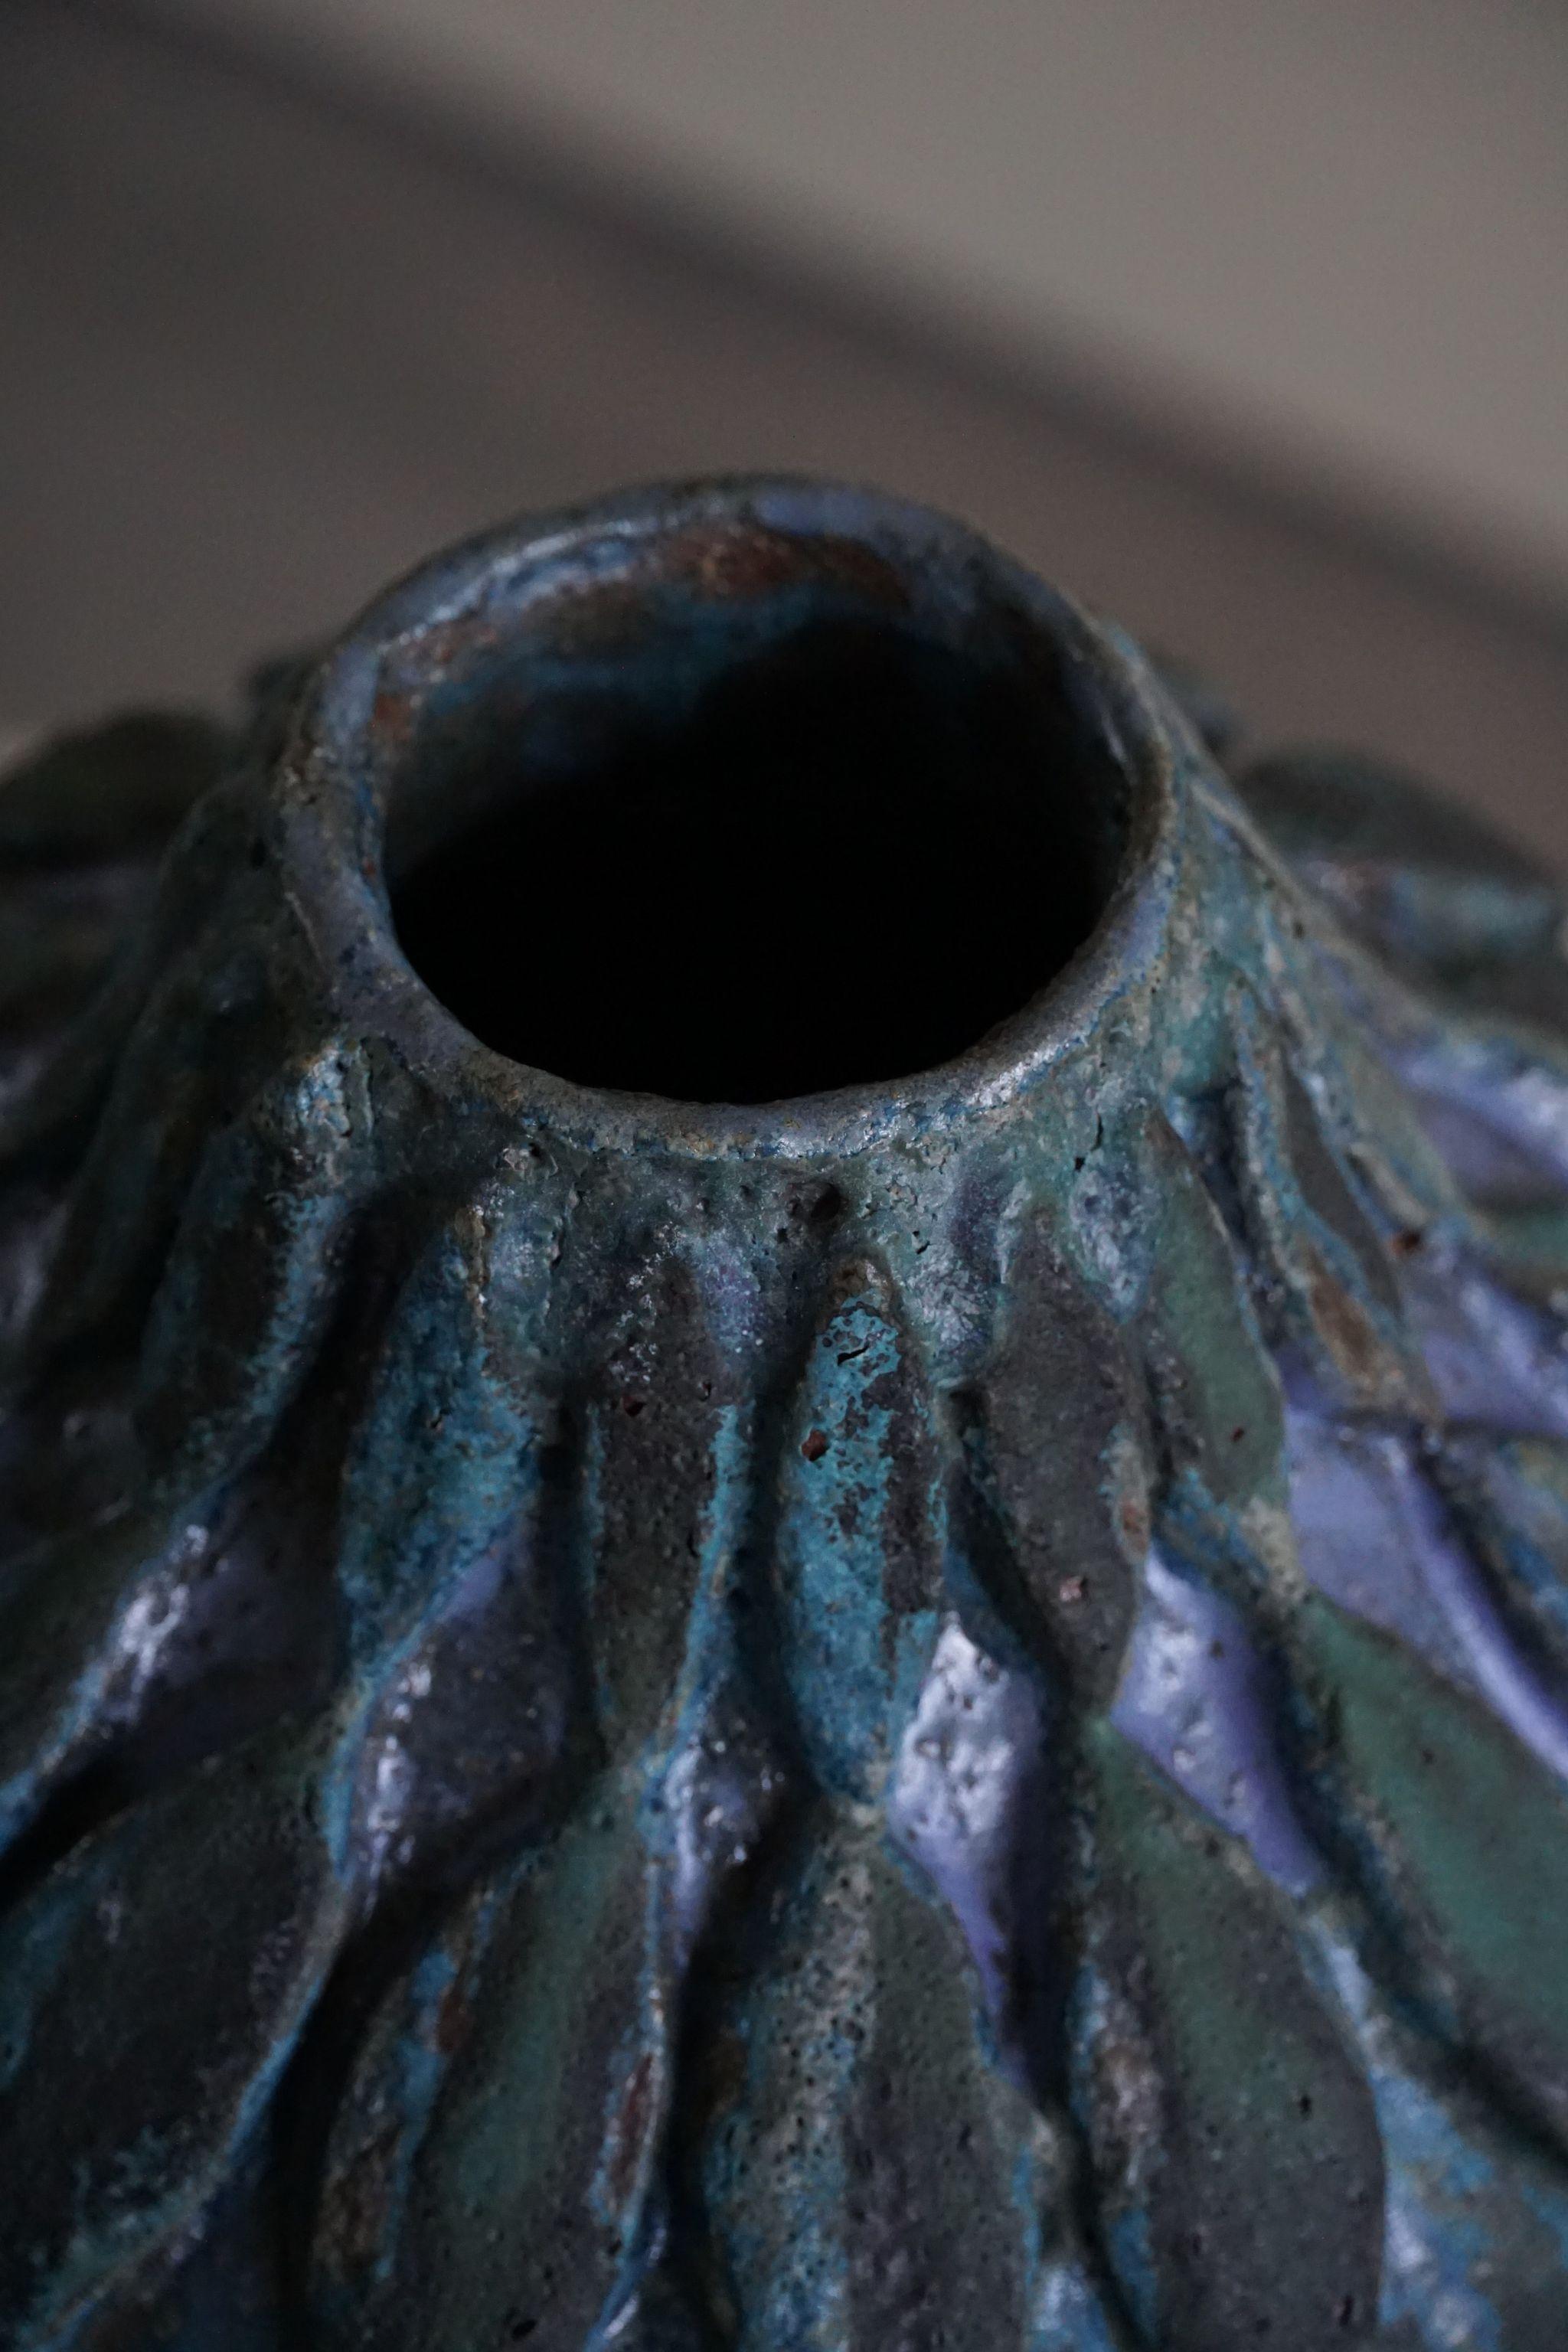 Hand-Crafted Ceramic, Stoneware Vase in Blue/Green Glaze by Danish Artist Ole Victor, 2021